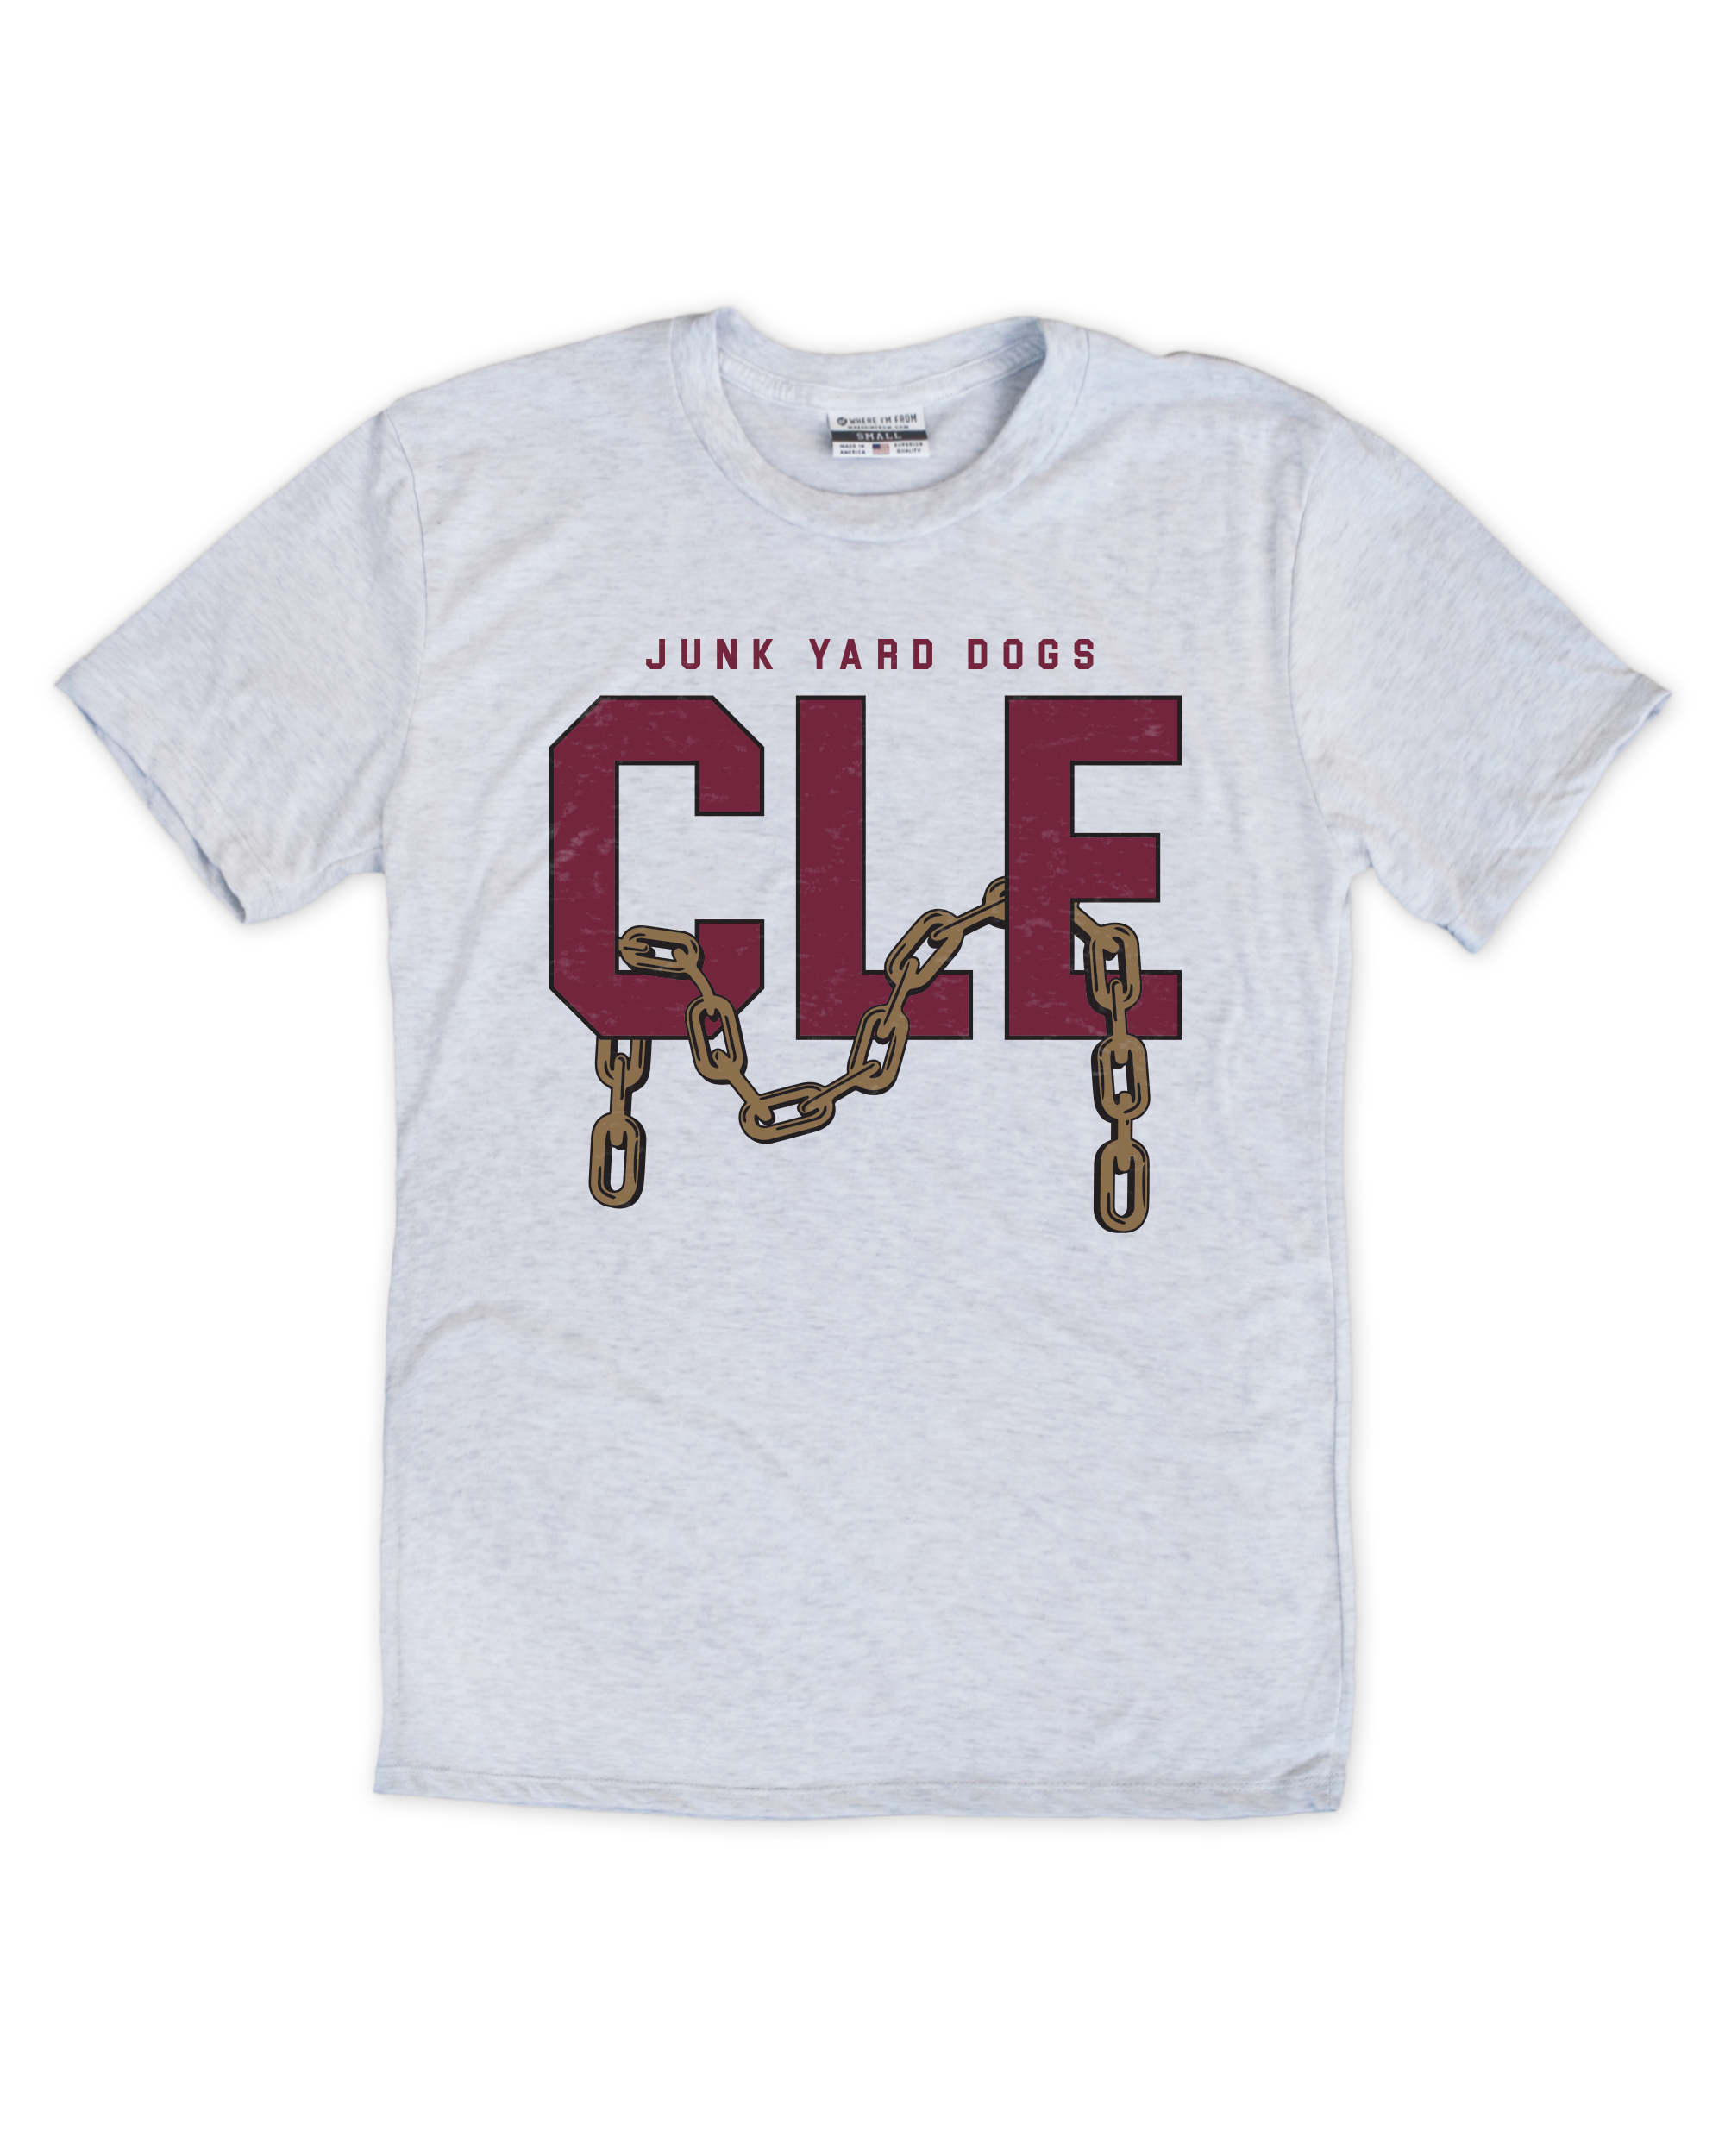 Junk Yard Dogs Cle Crew T-Shirt